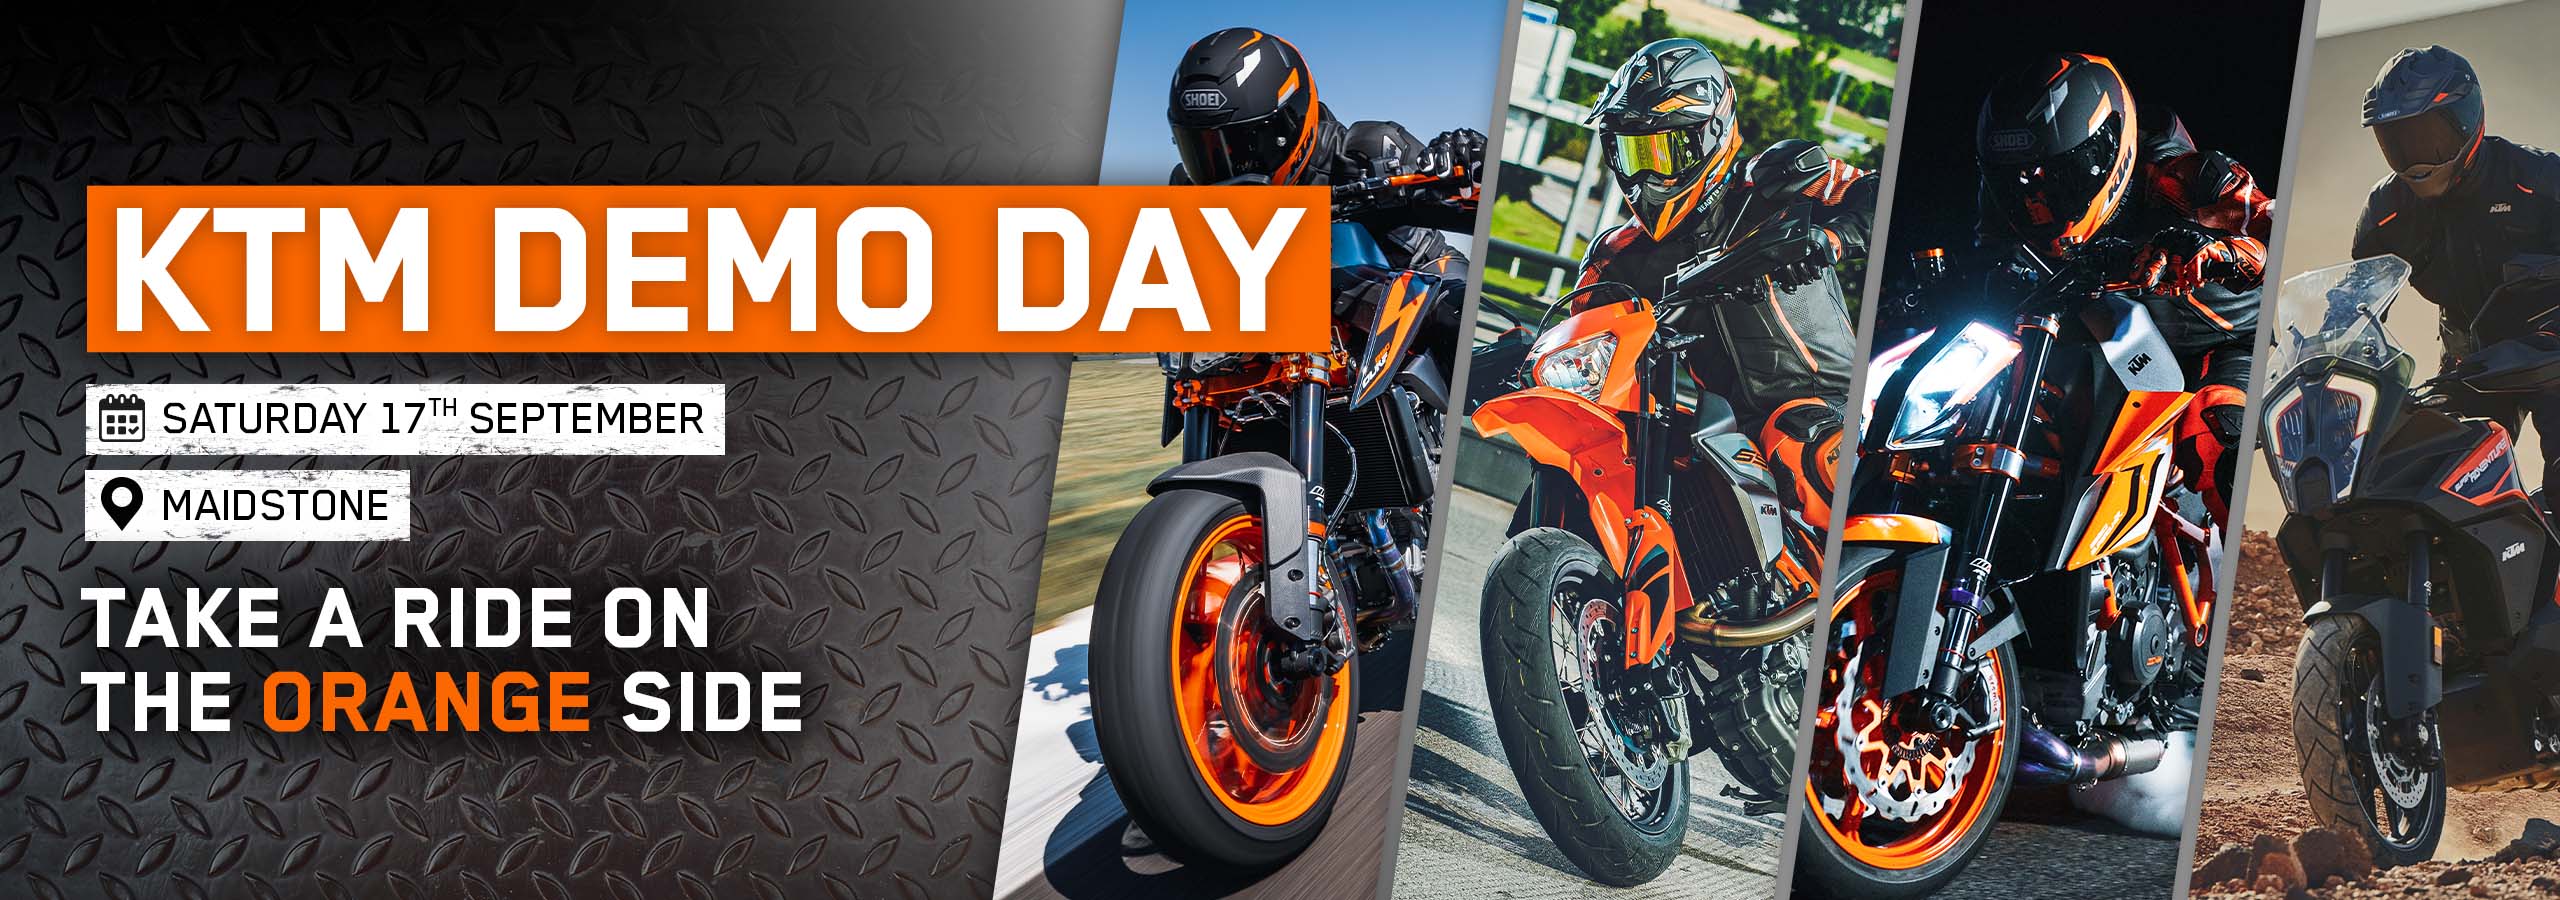 KTM Demo Day at Laguna Motorcycles in Maidstone on 17th September 2022